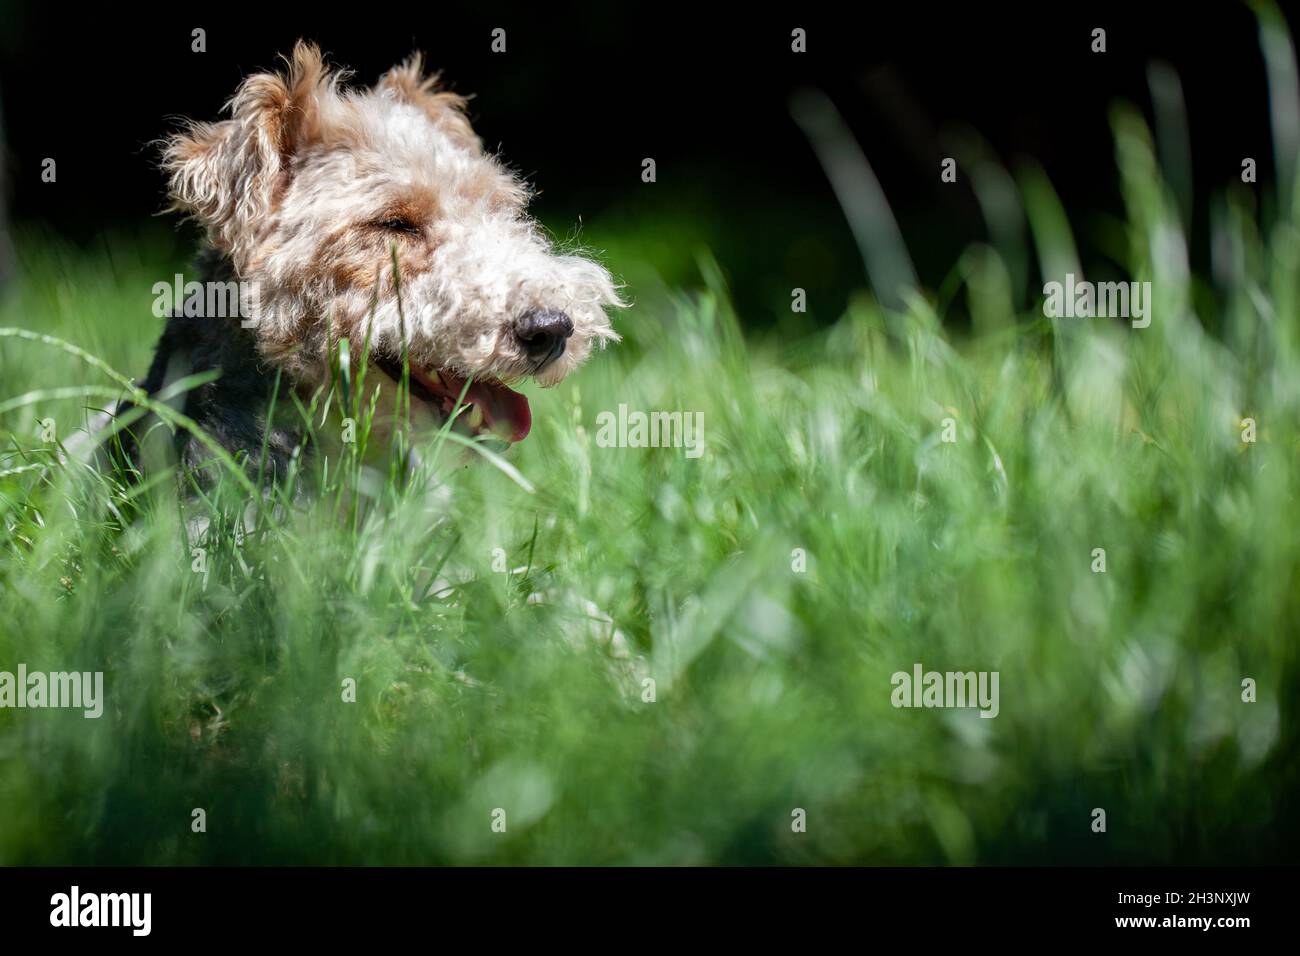 Close up shot of a cute Wire Haired Fox Terrier dog in a spring garden. Stock Photo